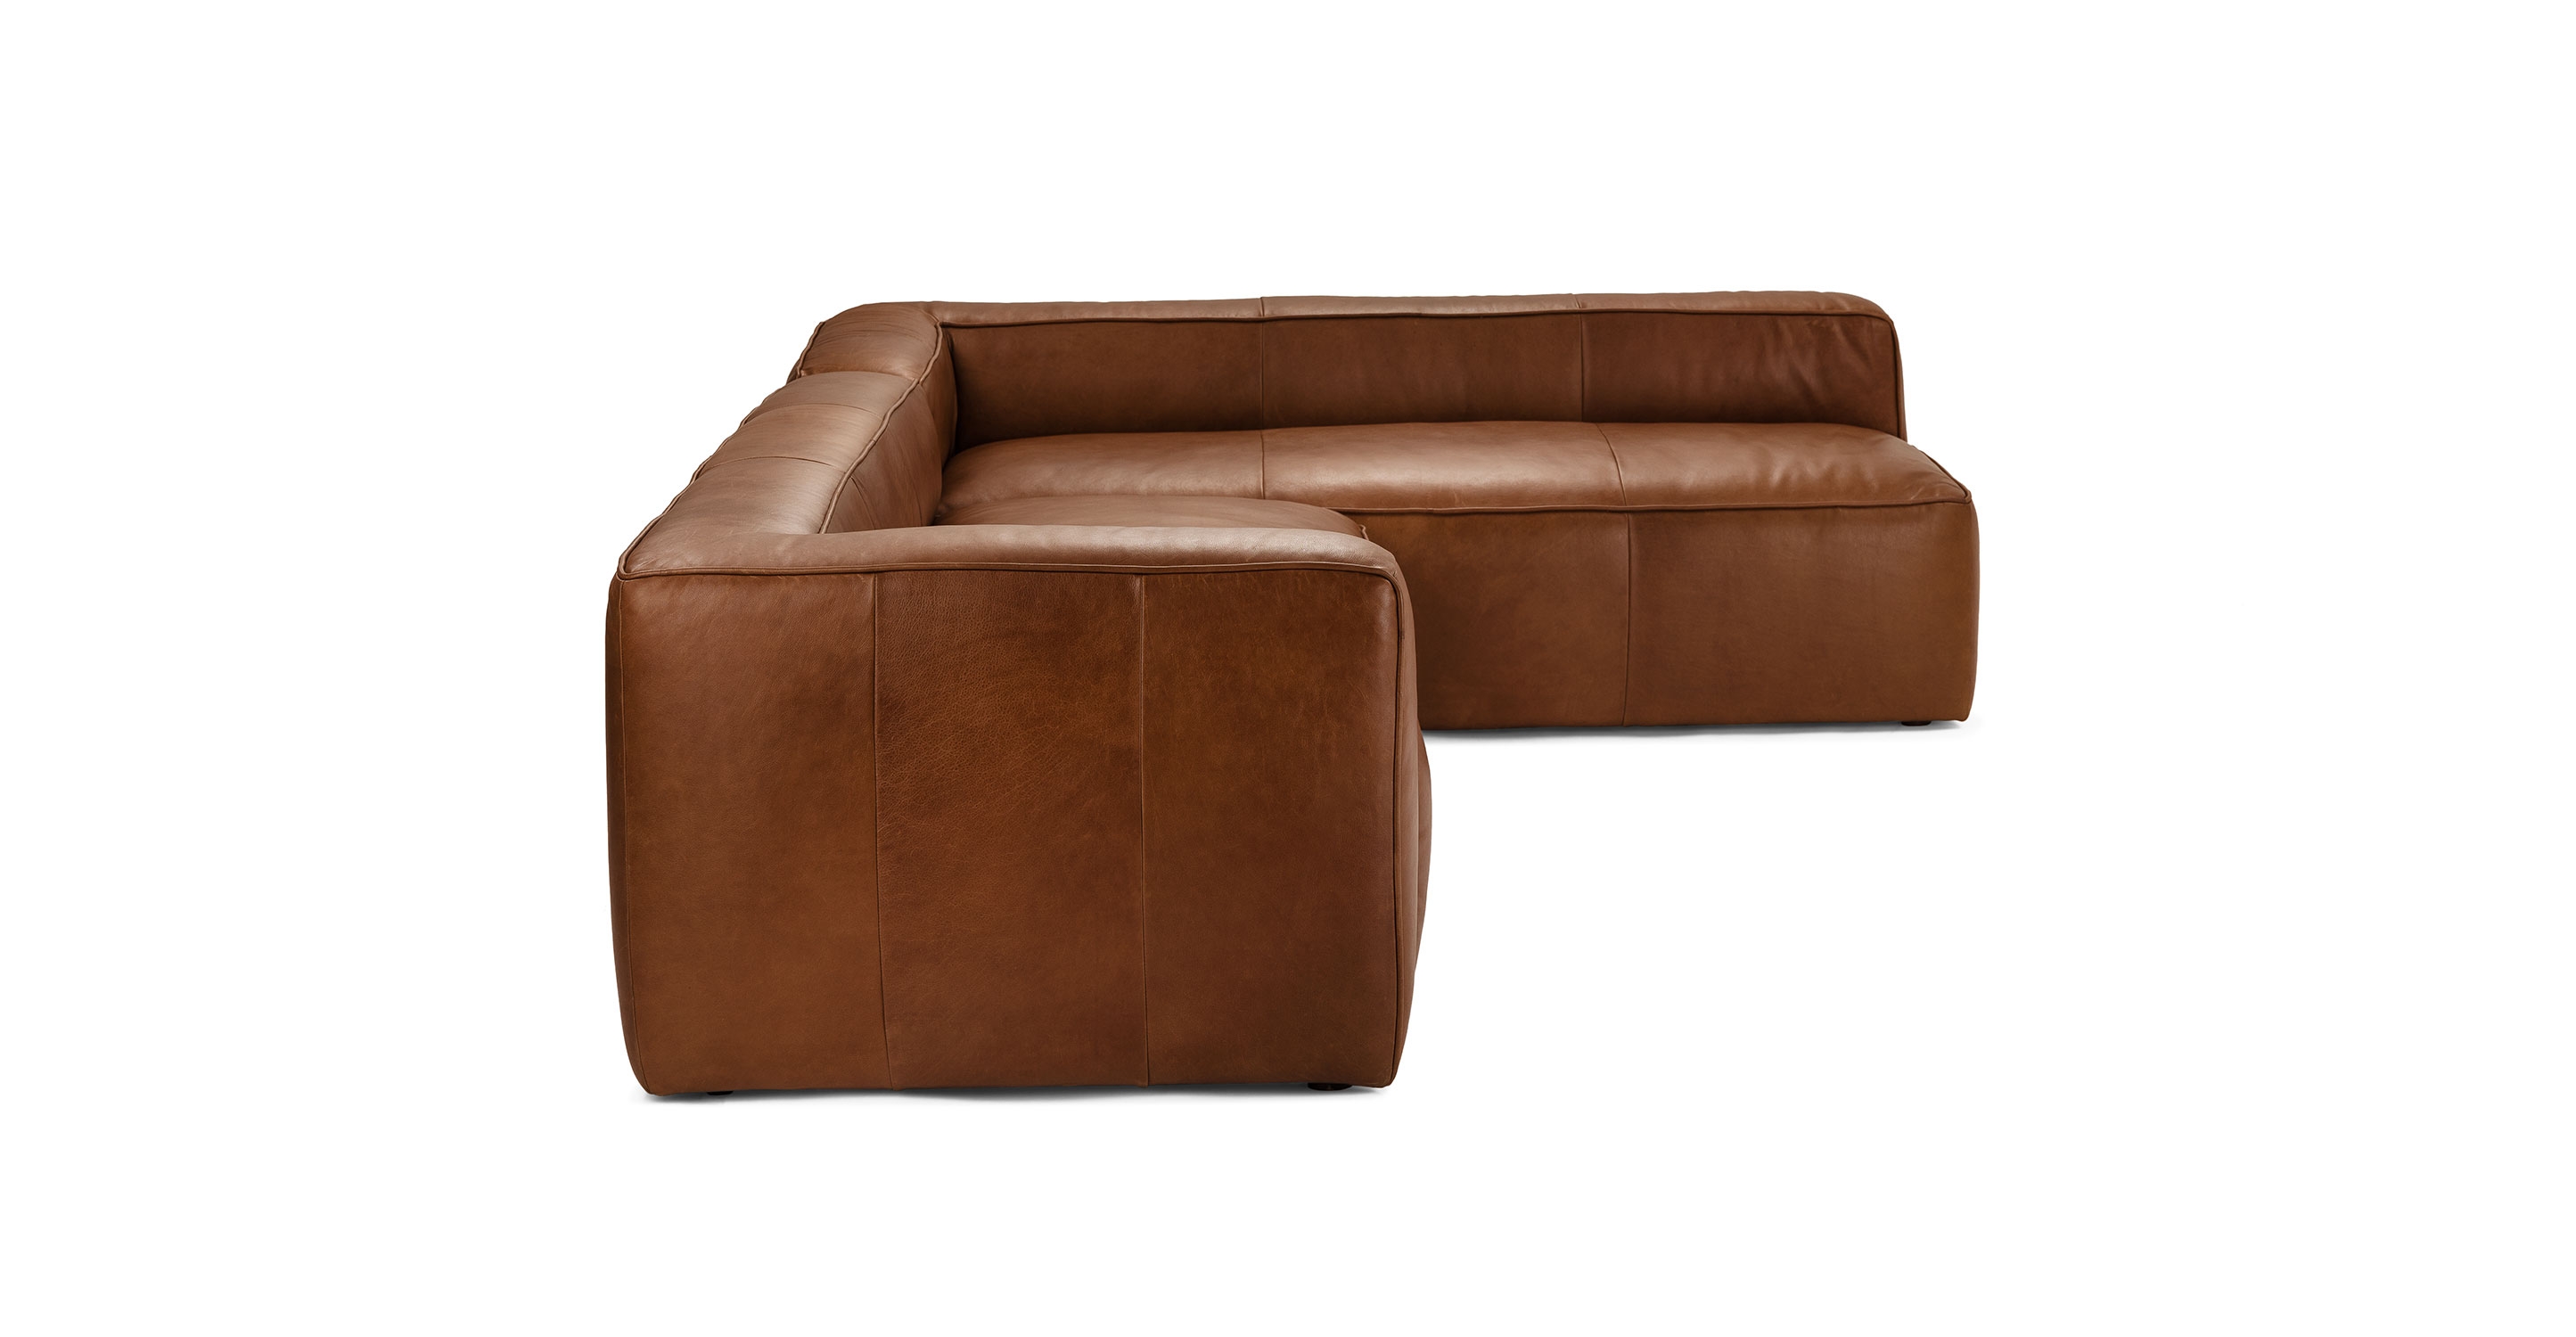 Mello Taos Brown Right Arm Corner Sectional - Image 2